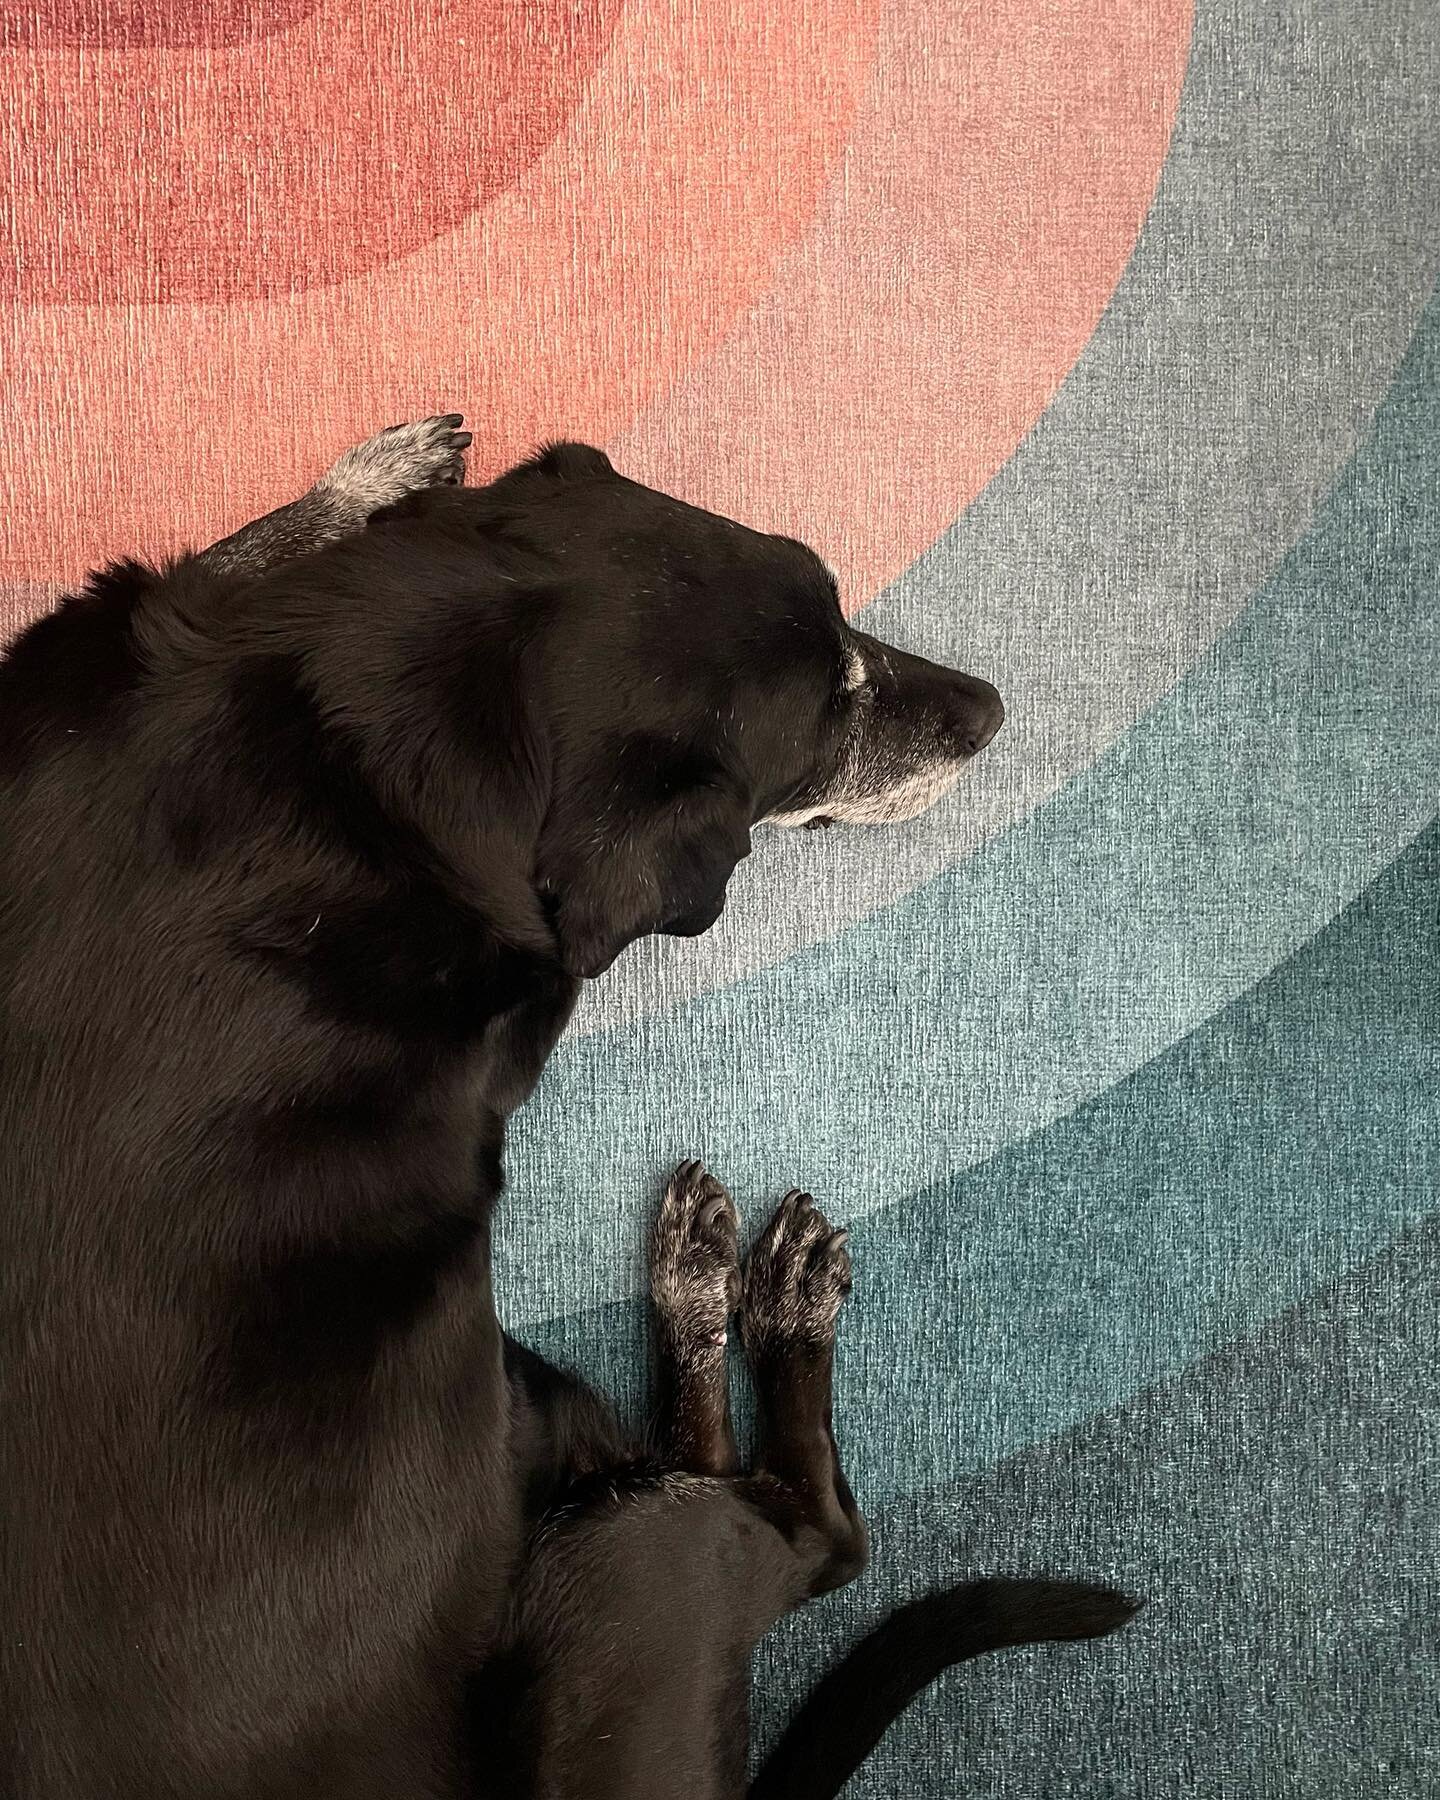 Baxter is very content on his new rug. Another great find at @ruggable for our pup. #dogsofinstagram #ruggable